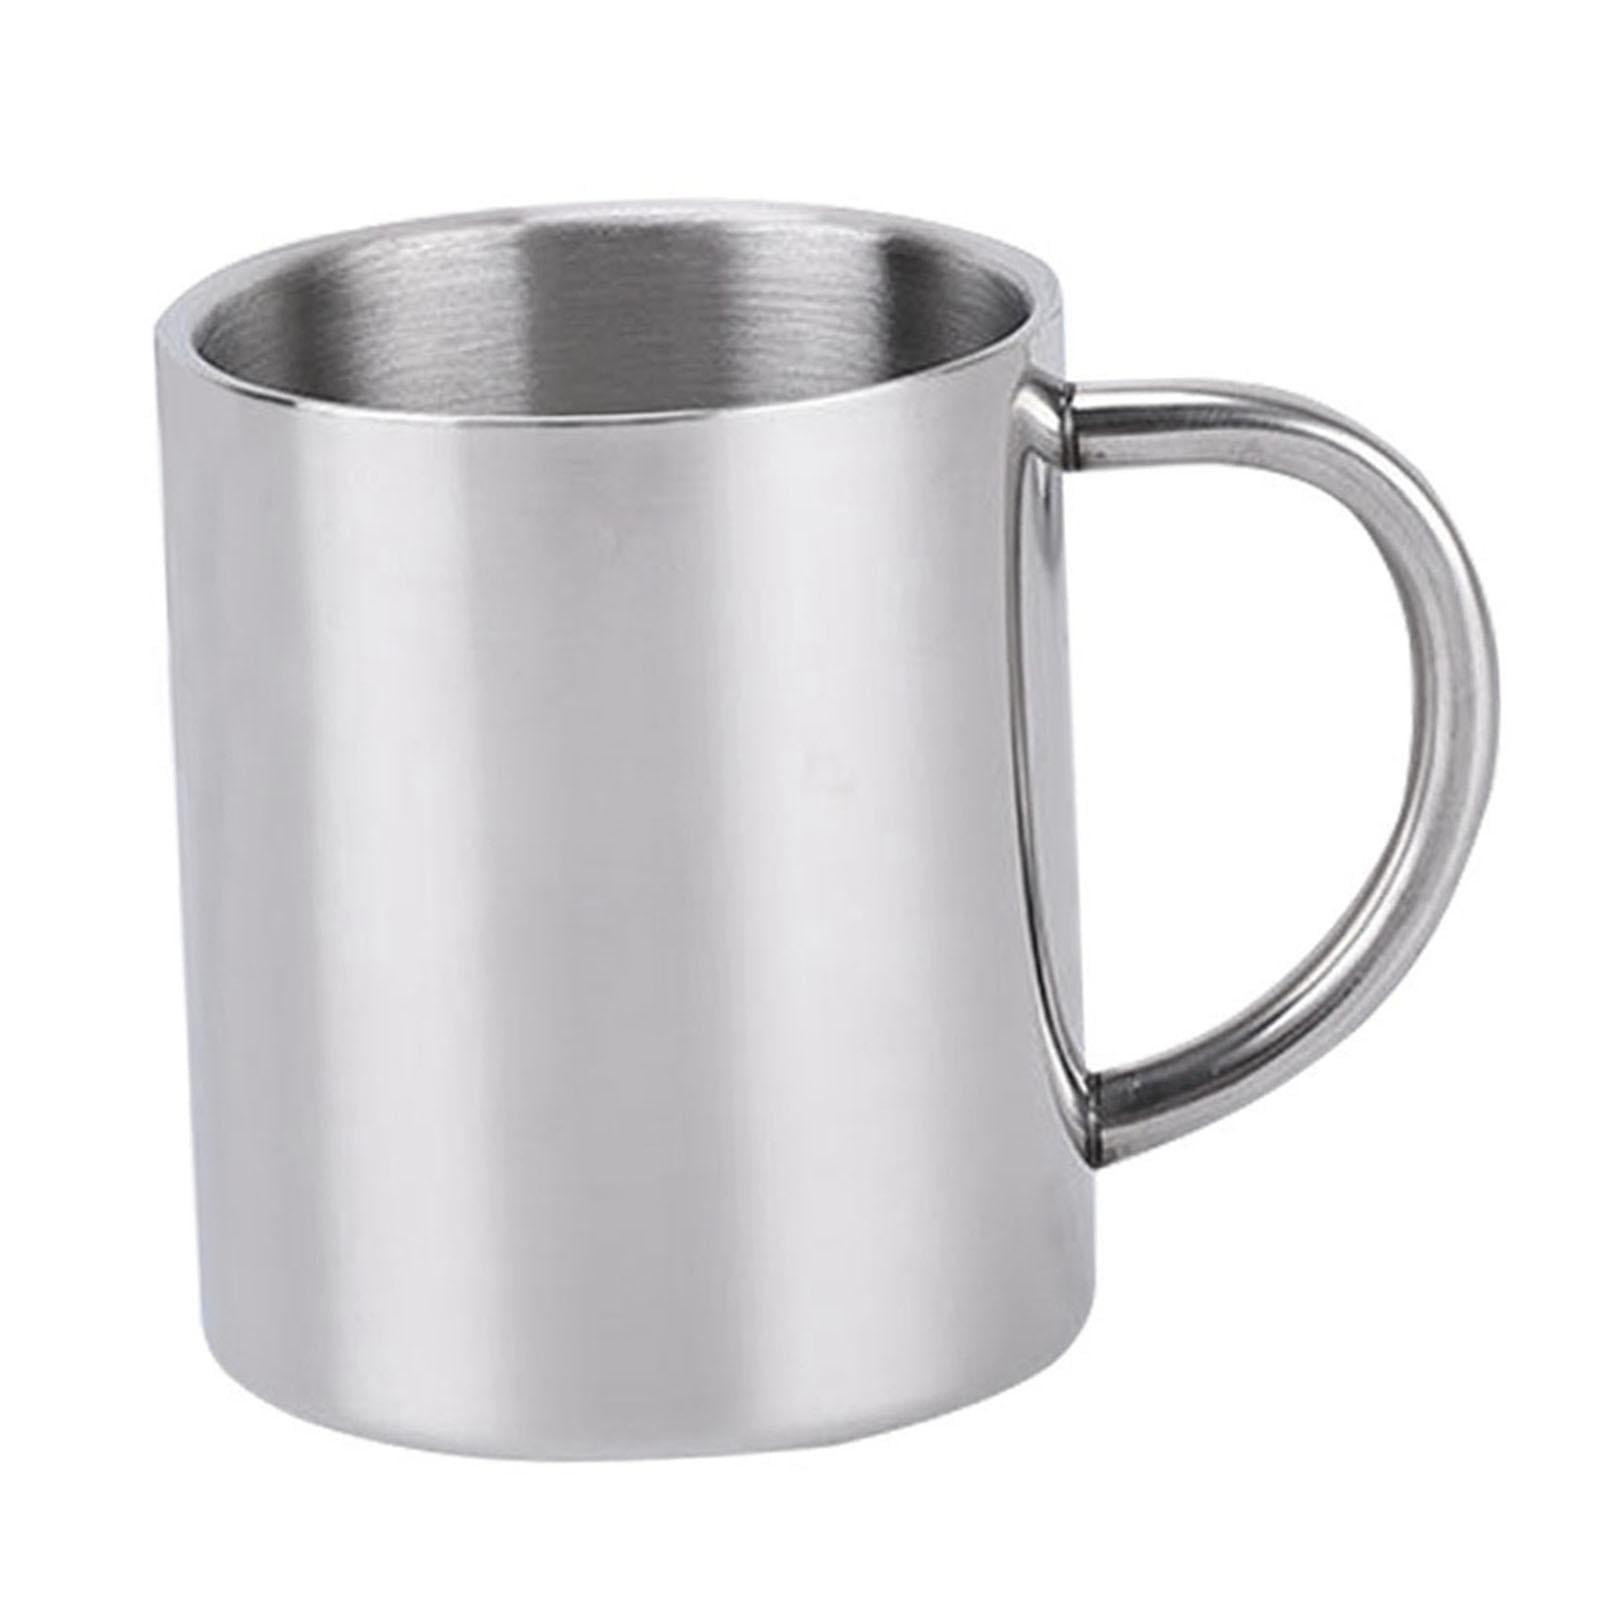 Stainless Steel Beer Mug Coffee Cup Tea Double Wall Camping Drinking Cup 